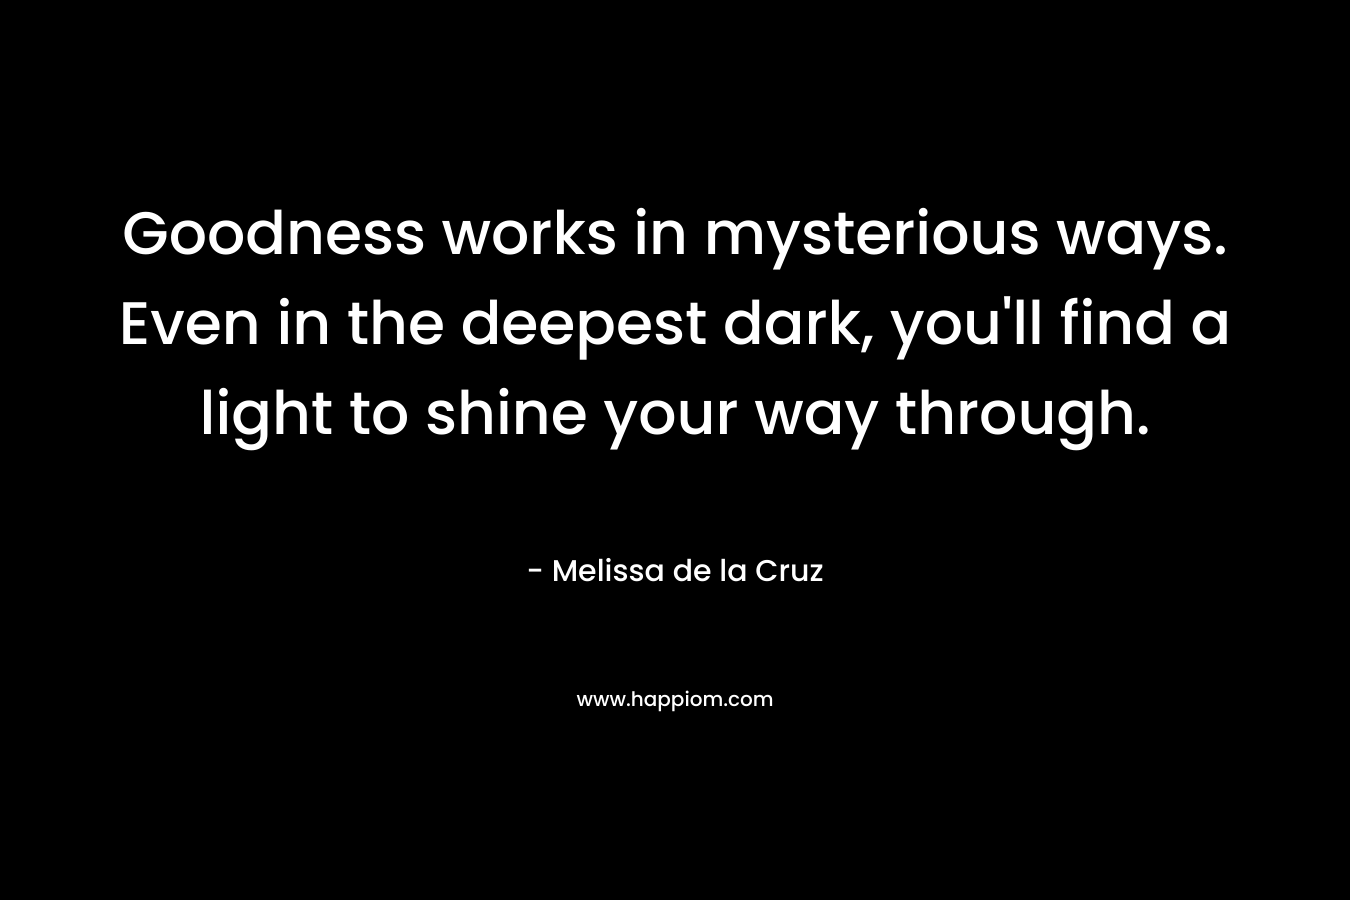 Goodness works in mysterious ways. Even in the deepest dark, you’ll find a light to shine your way through. – Melissa de la Cruz